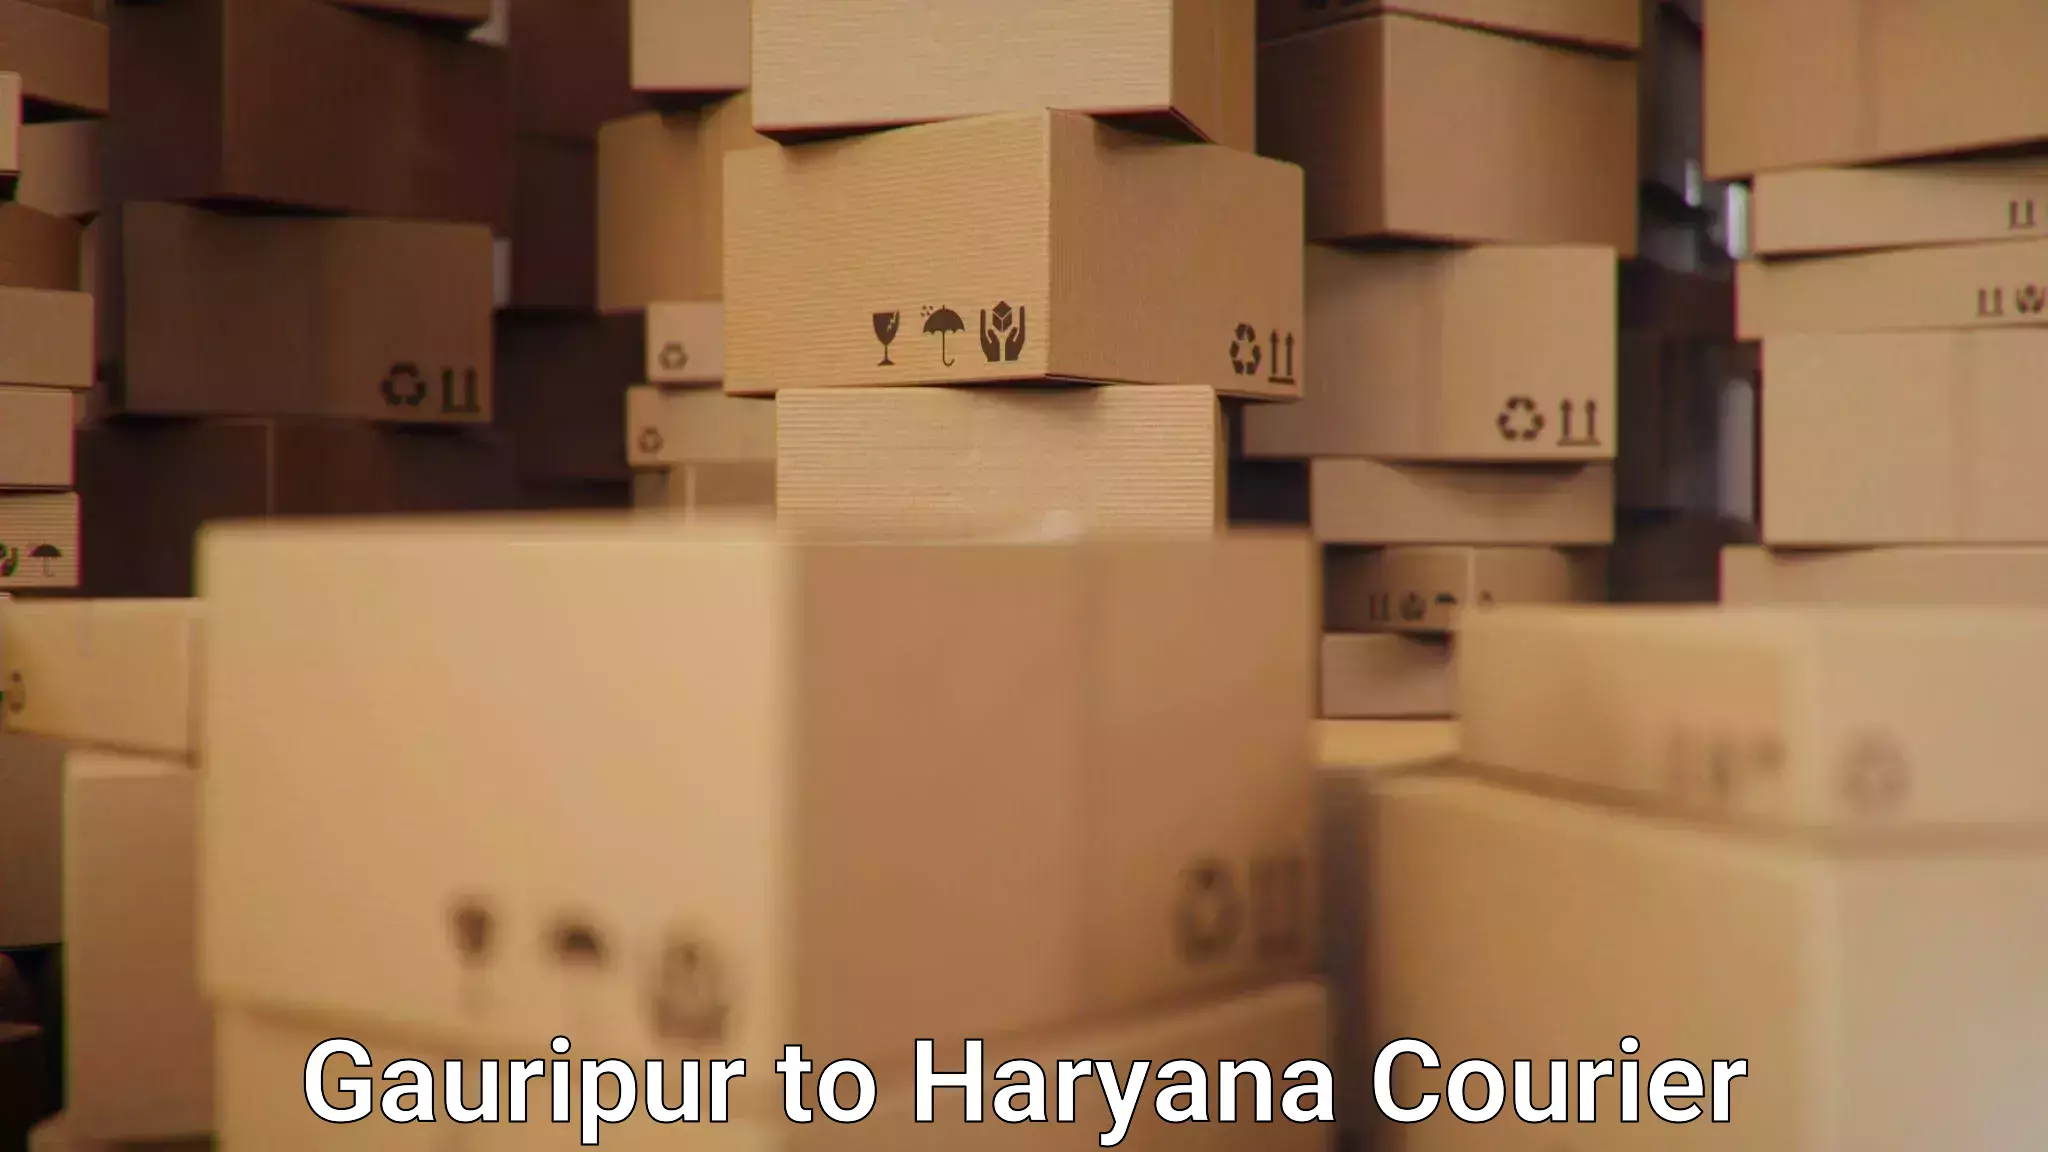 Courier service partnerships Gauripur to Hansi